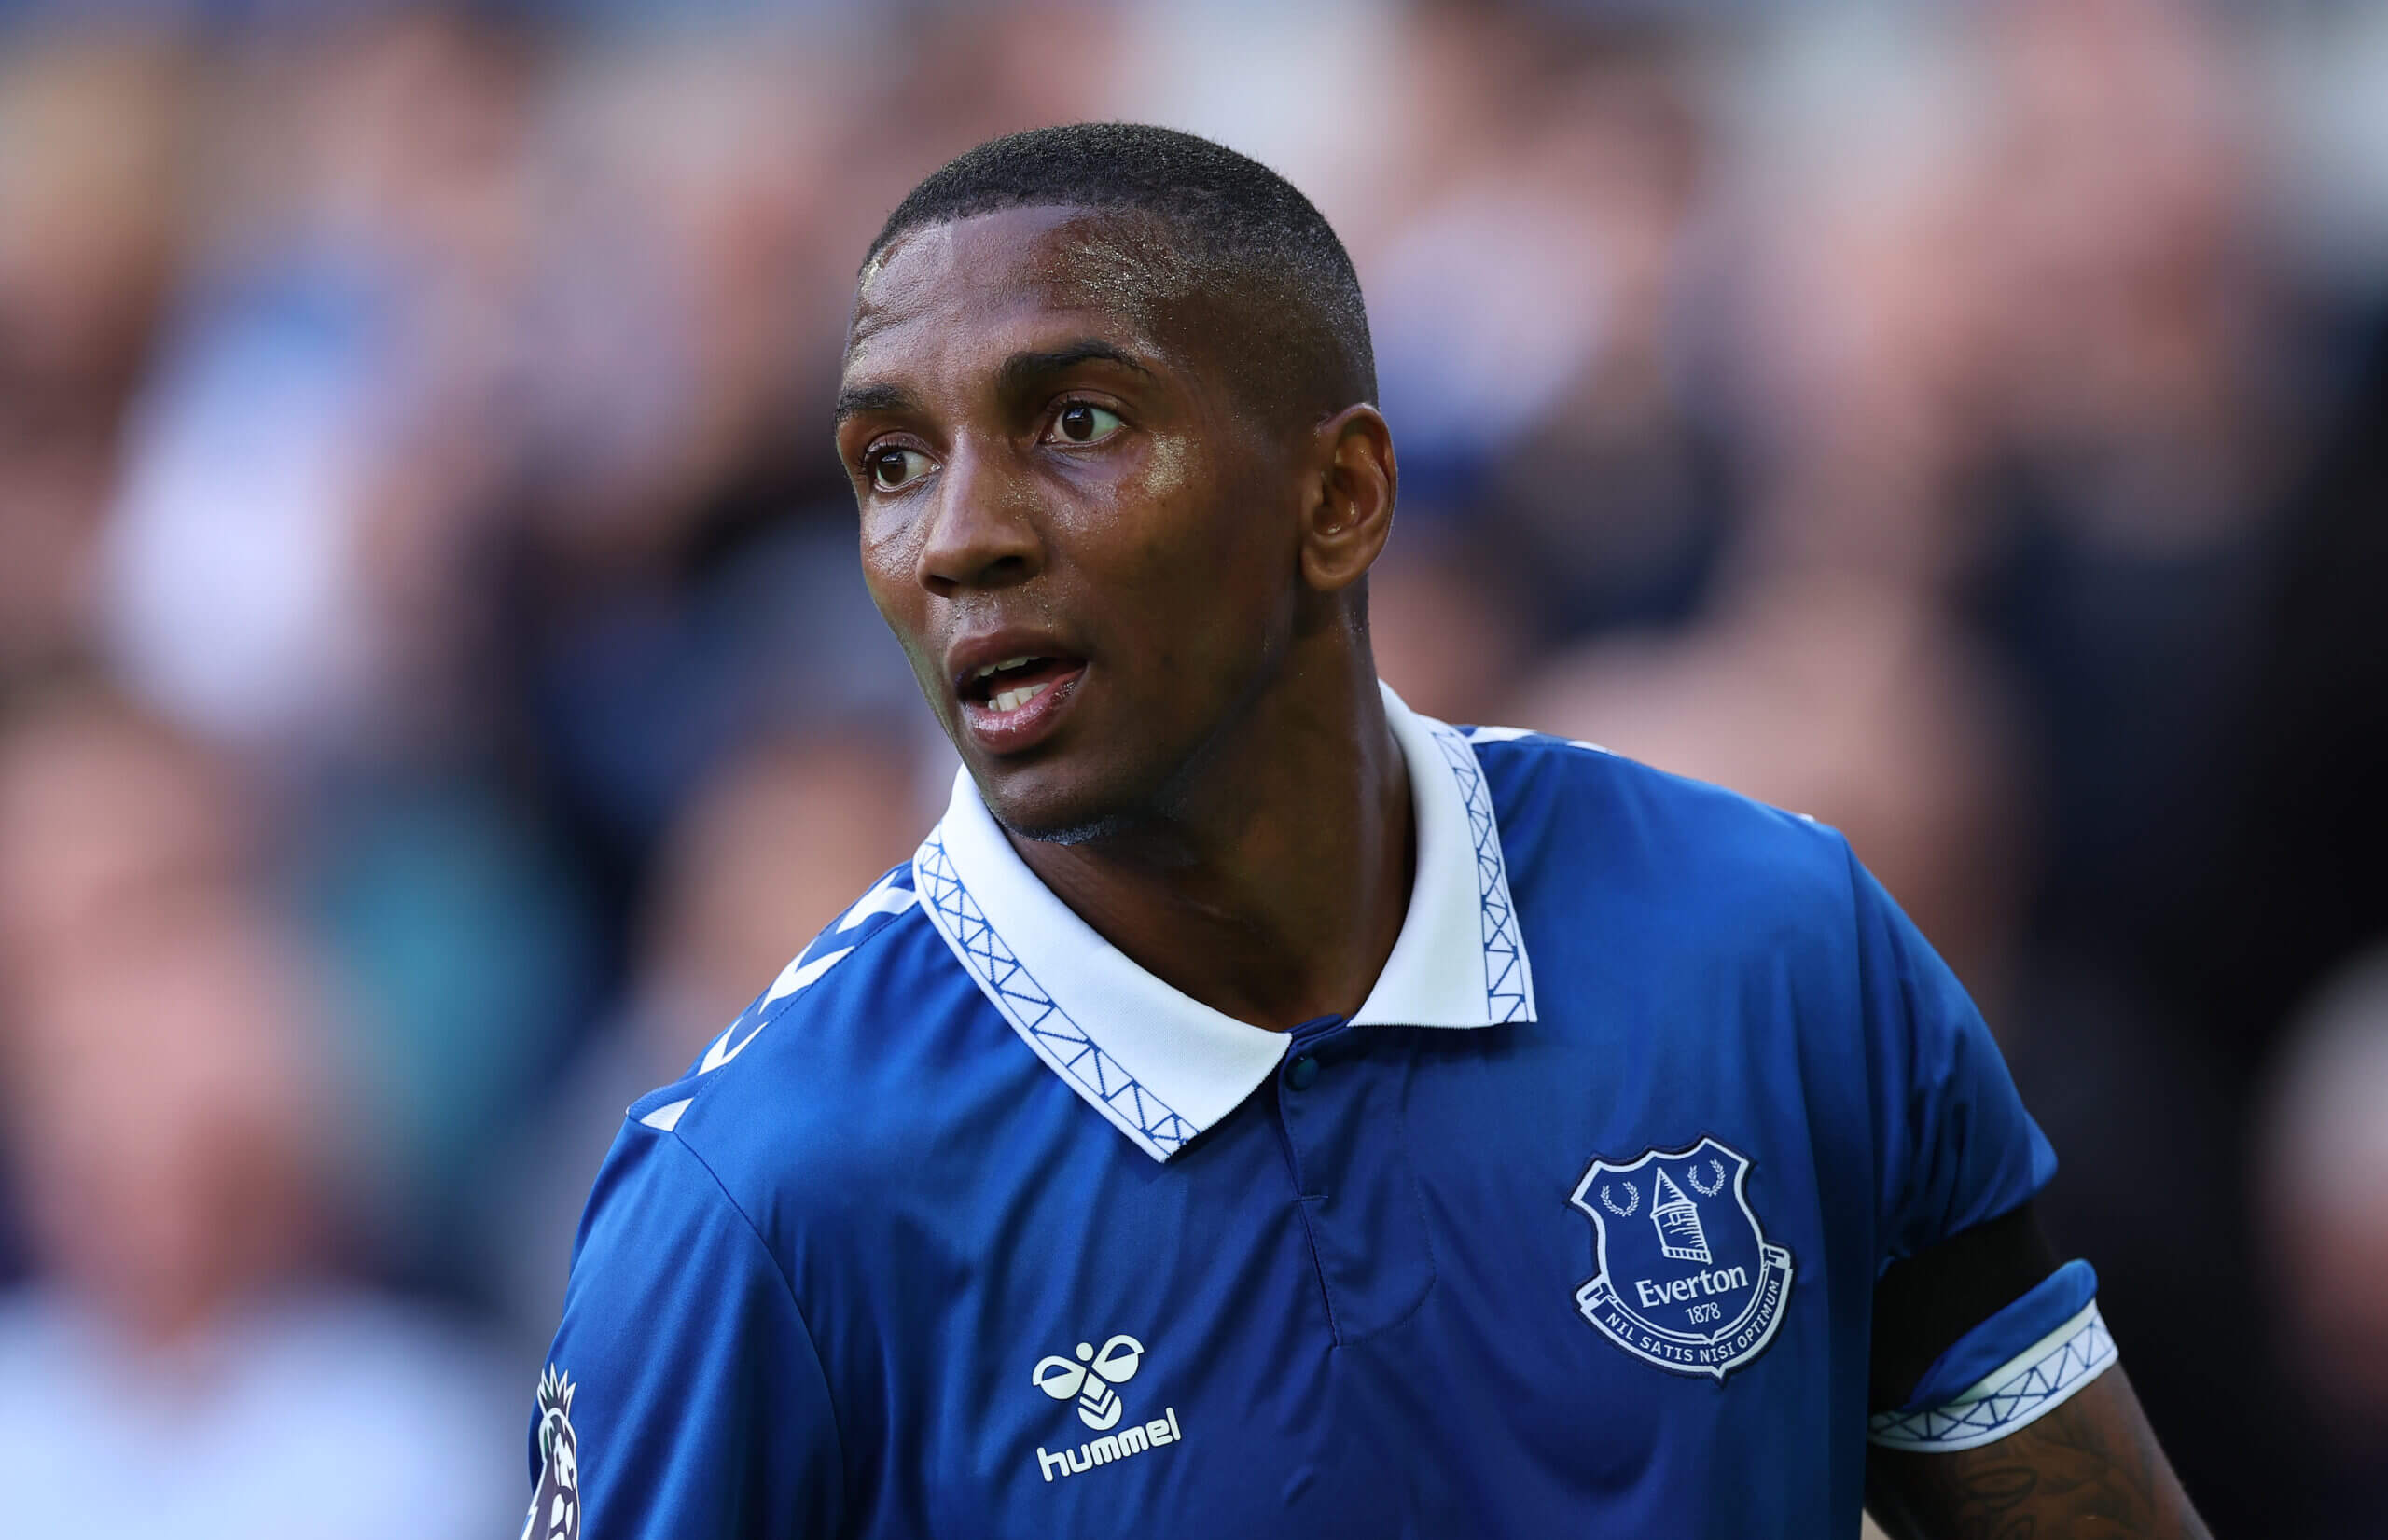 Everton's Young wants 'to play as long as possible' amid new contract offer